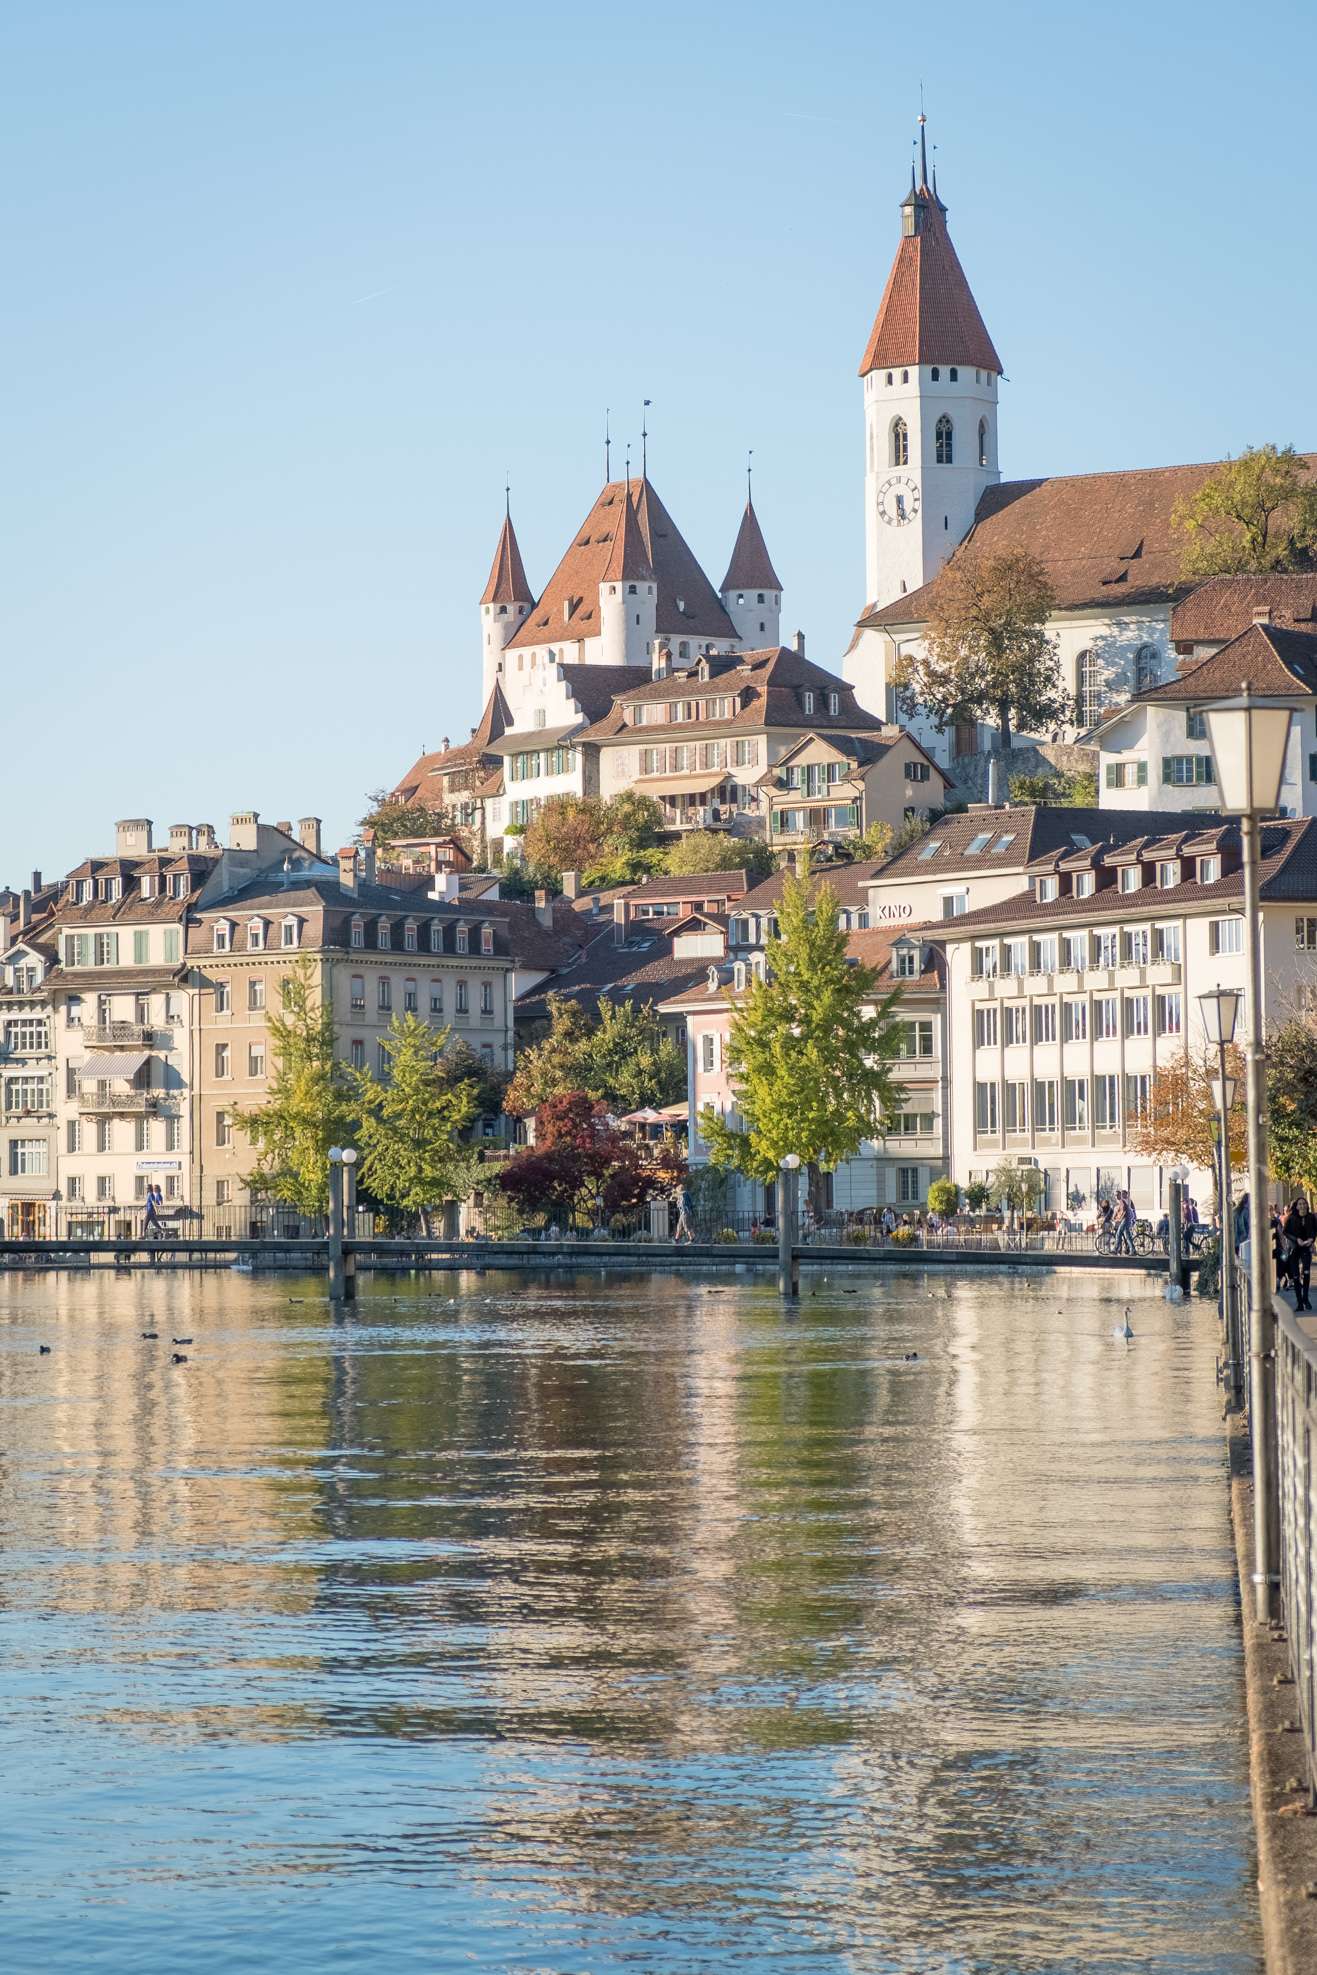 Thun castle over the river Aare